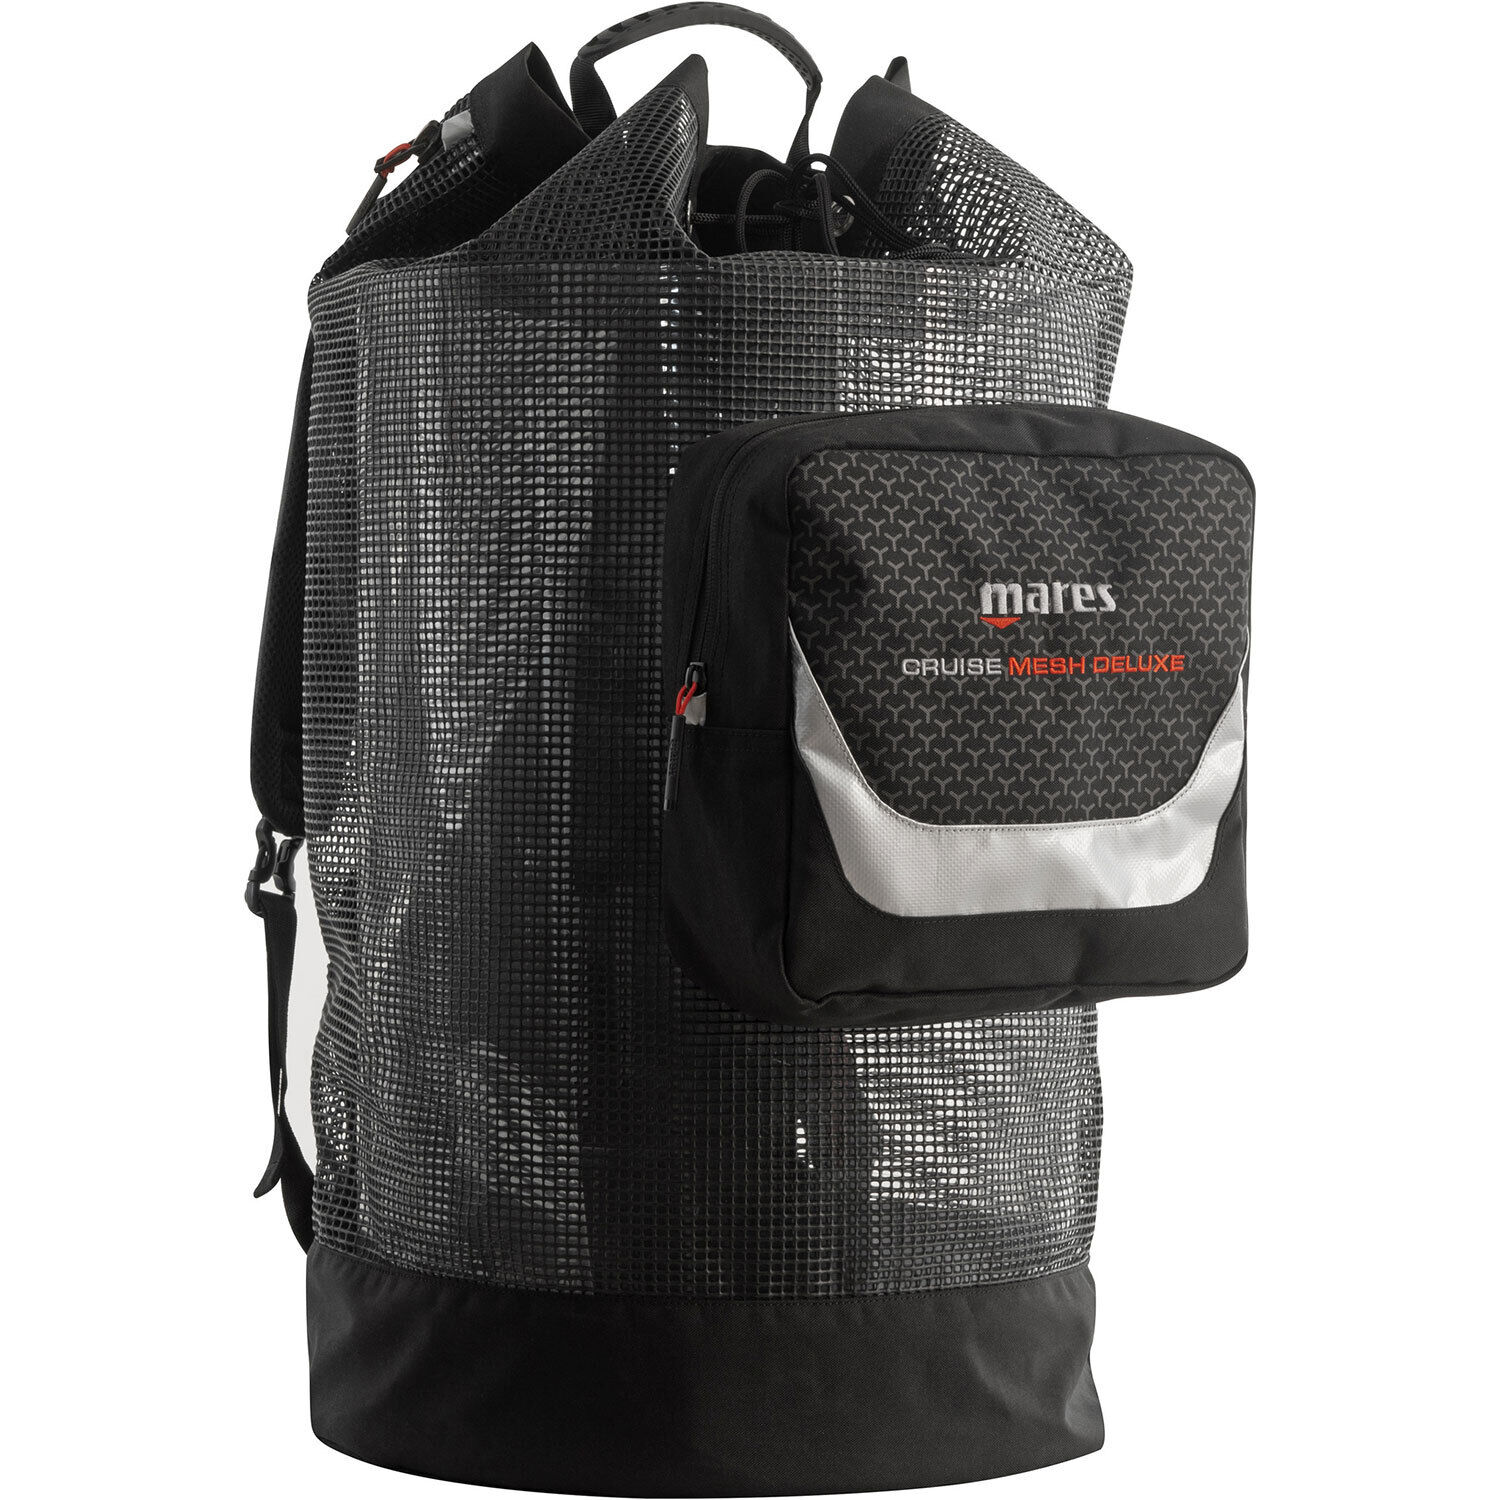 Mares Cruise Backpack Mesh Deluxe Bag, Black